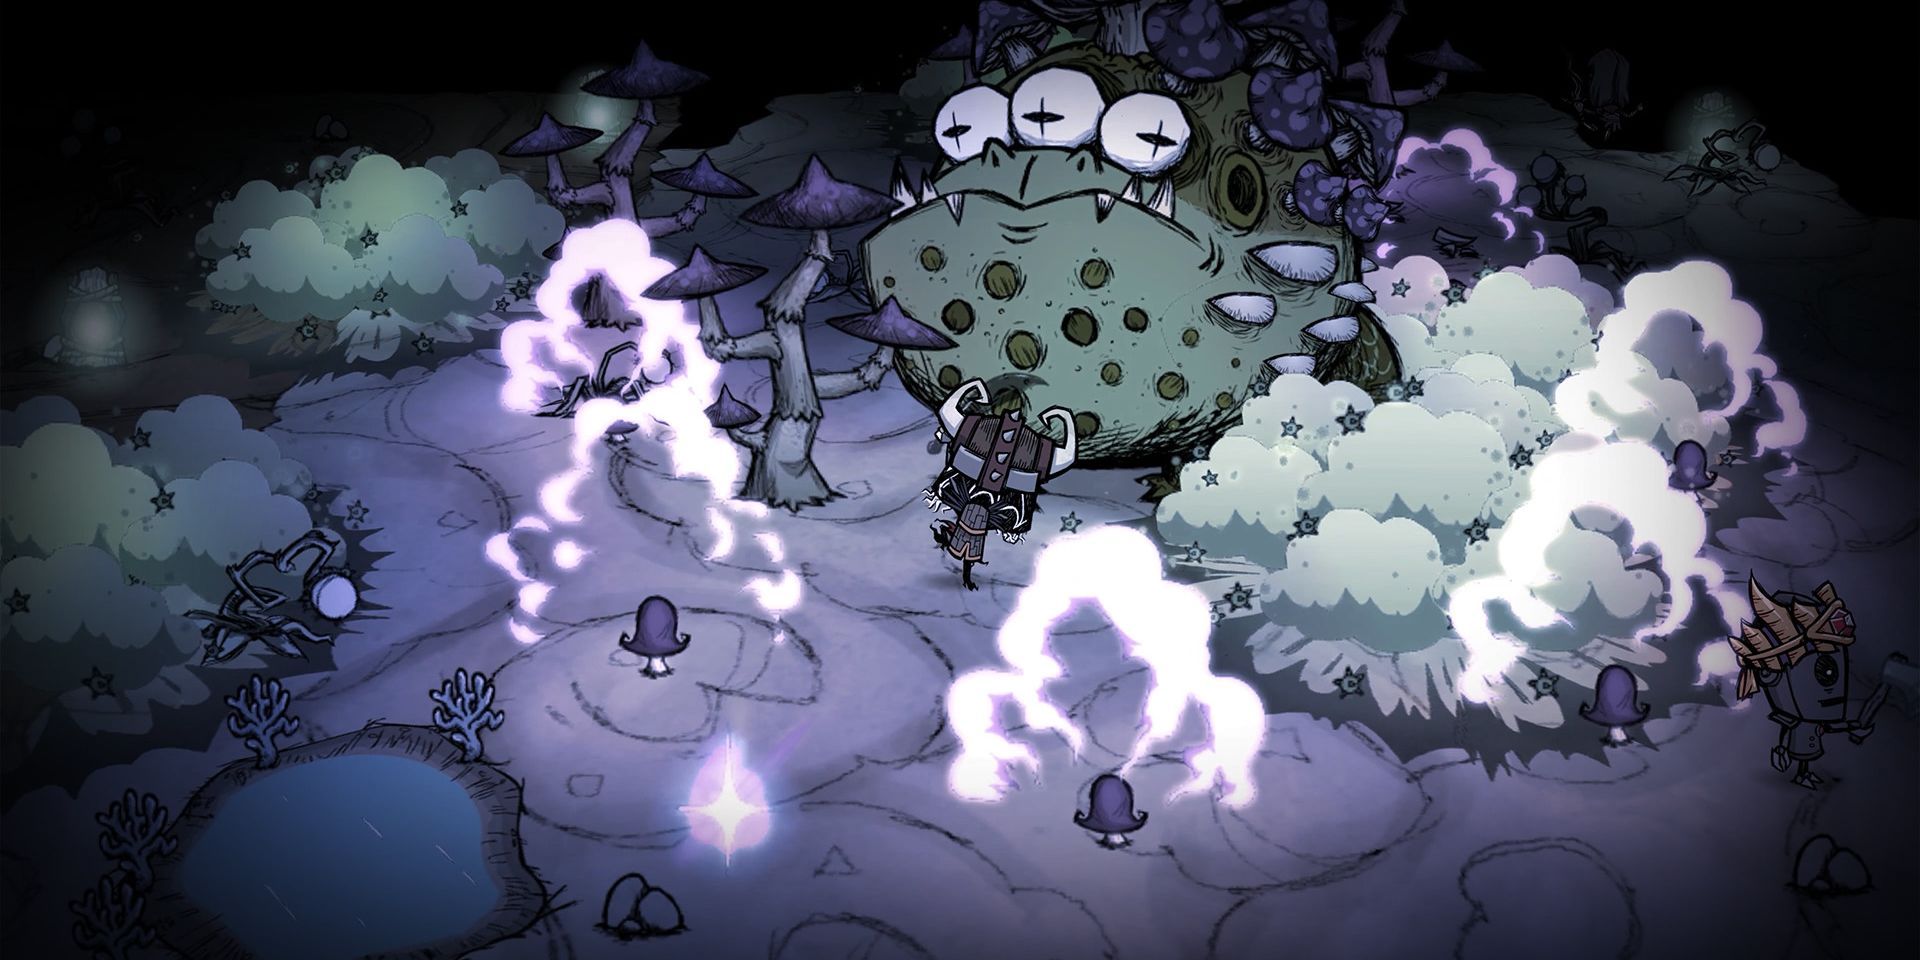 Fighting a giant frog with three eyes in Don't Starve